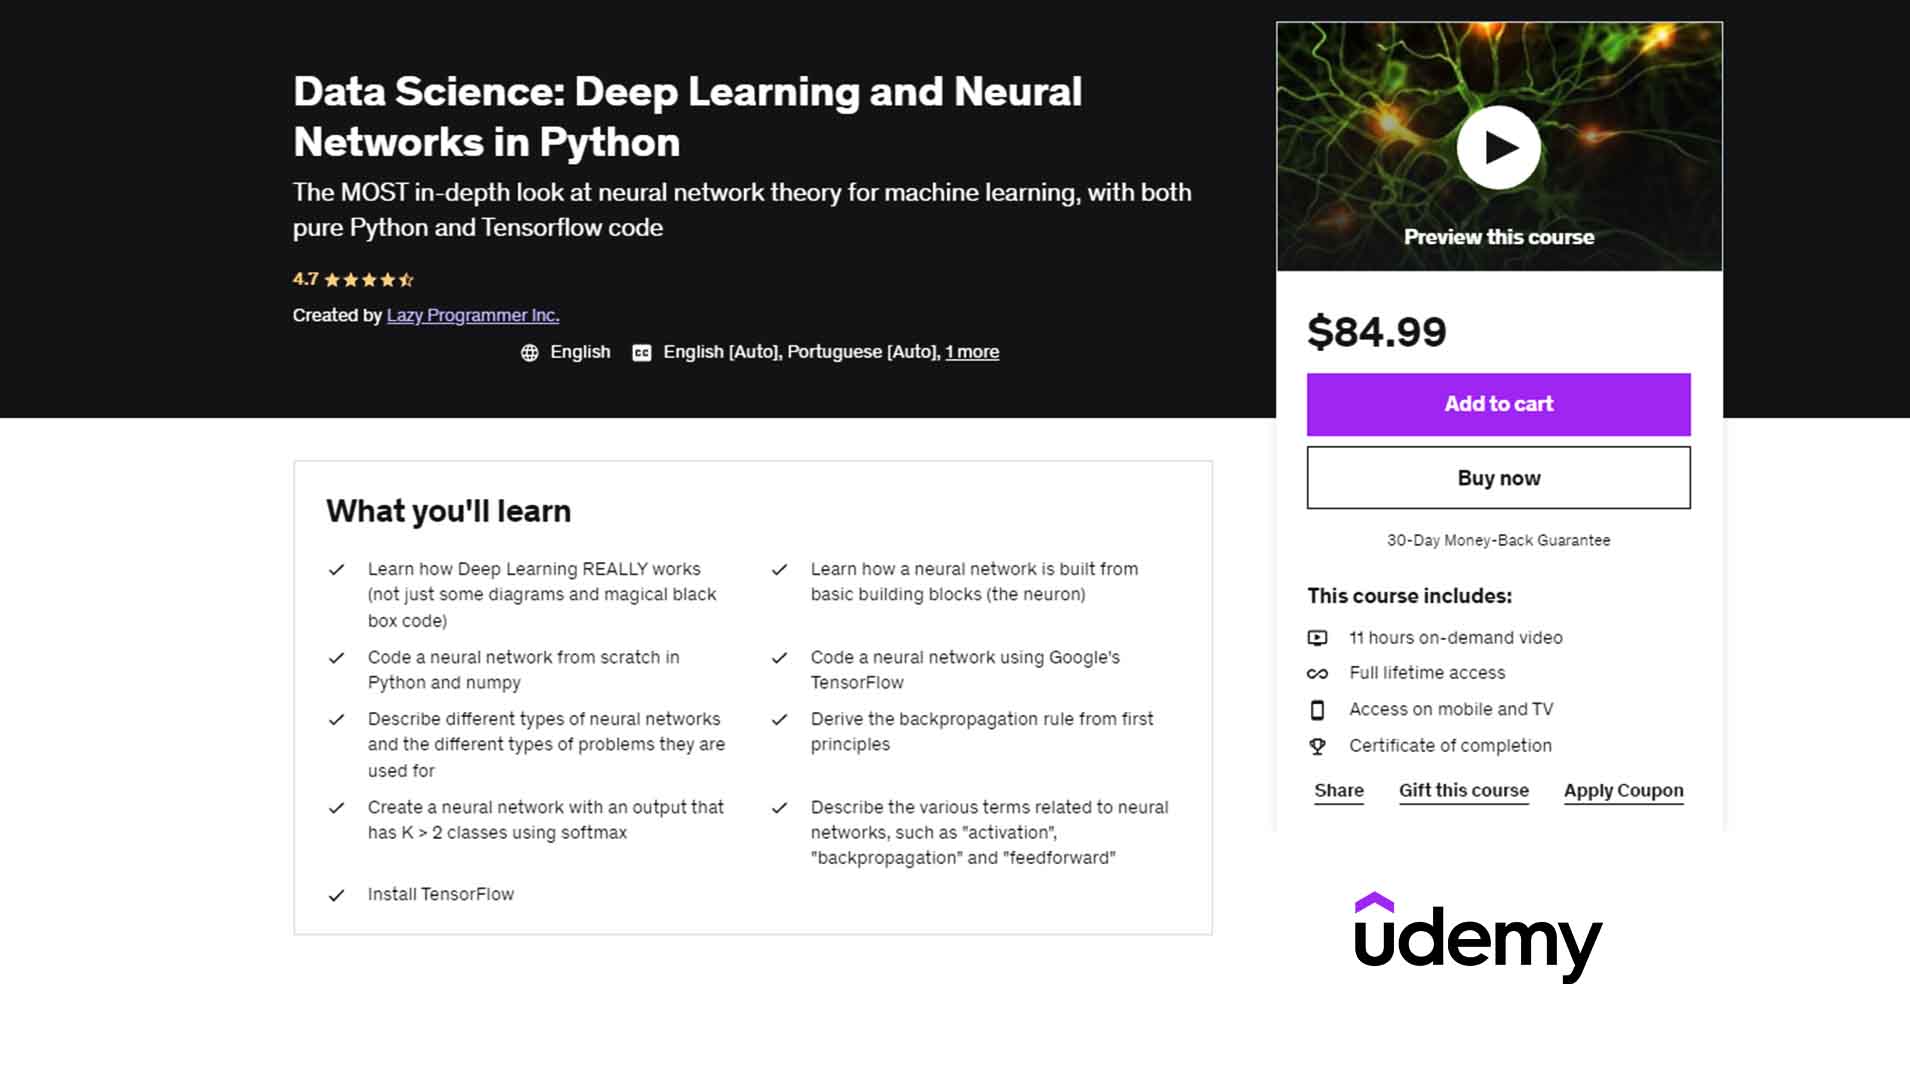 Data Science: Deep Learning and Neural Networks in Python